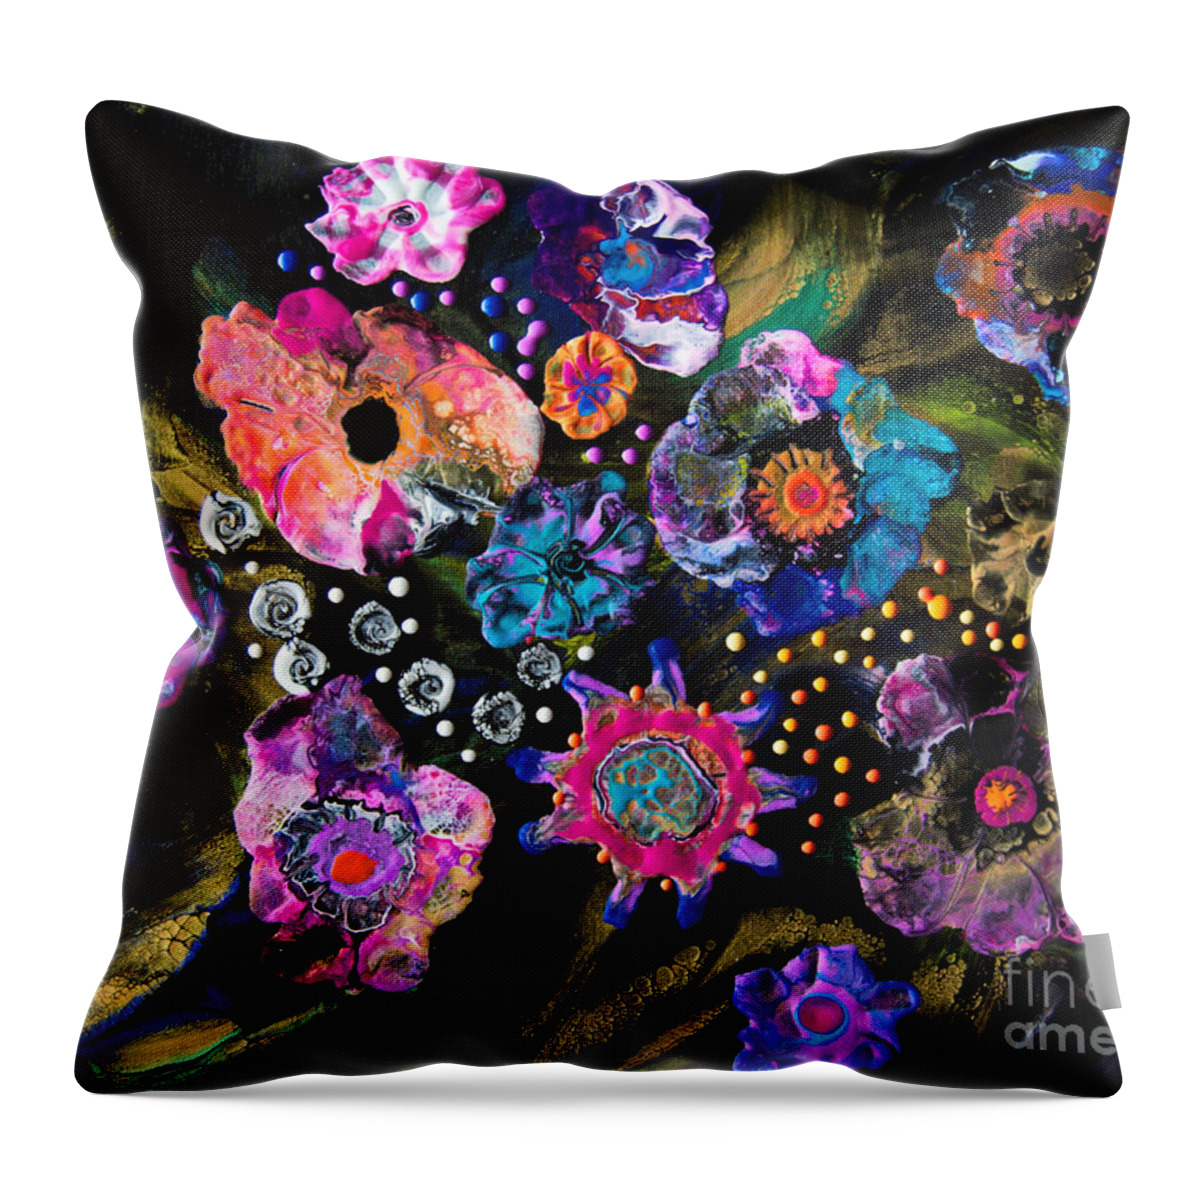 Flowers Throw Pillow featuring the painting Fantasy Flowers 7845 by Priscilla Batzell Expressionist Art Studio Gallery